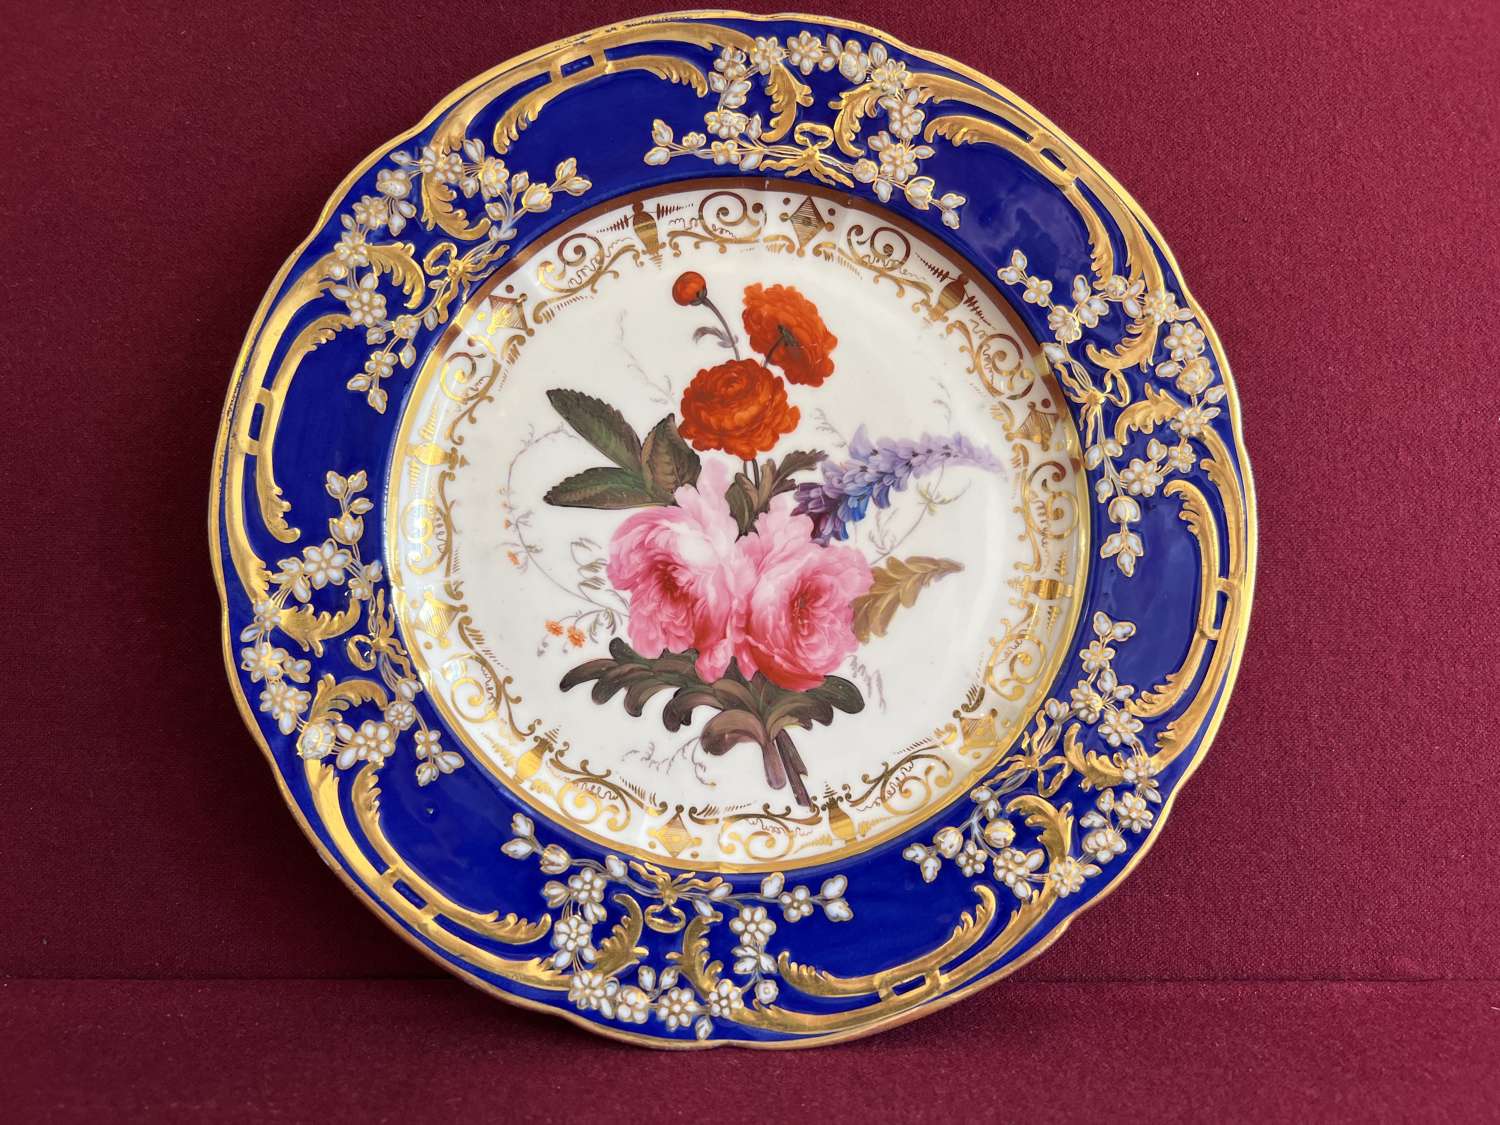 A Coalport Porcelain Dinner Plate decorated by Thomas Brentnall